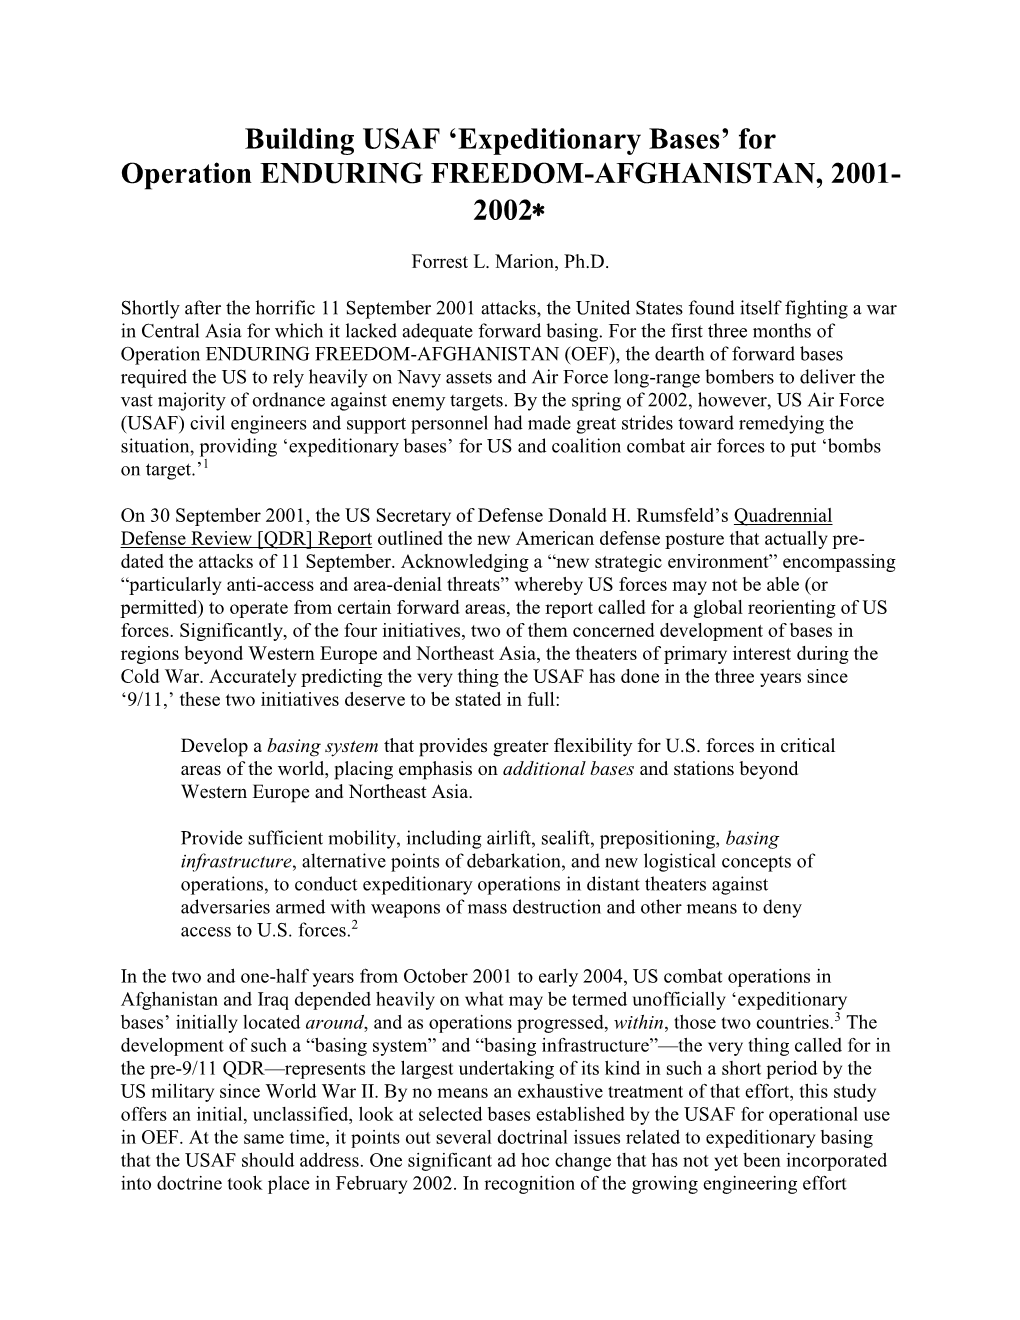 Building USAF 'Expeditionary Bases' for Operation ENDURING